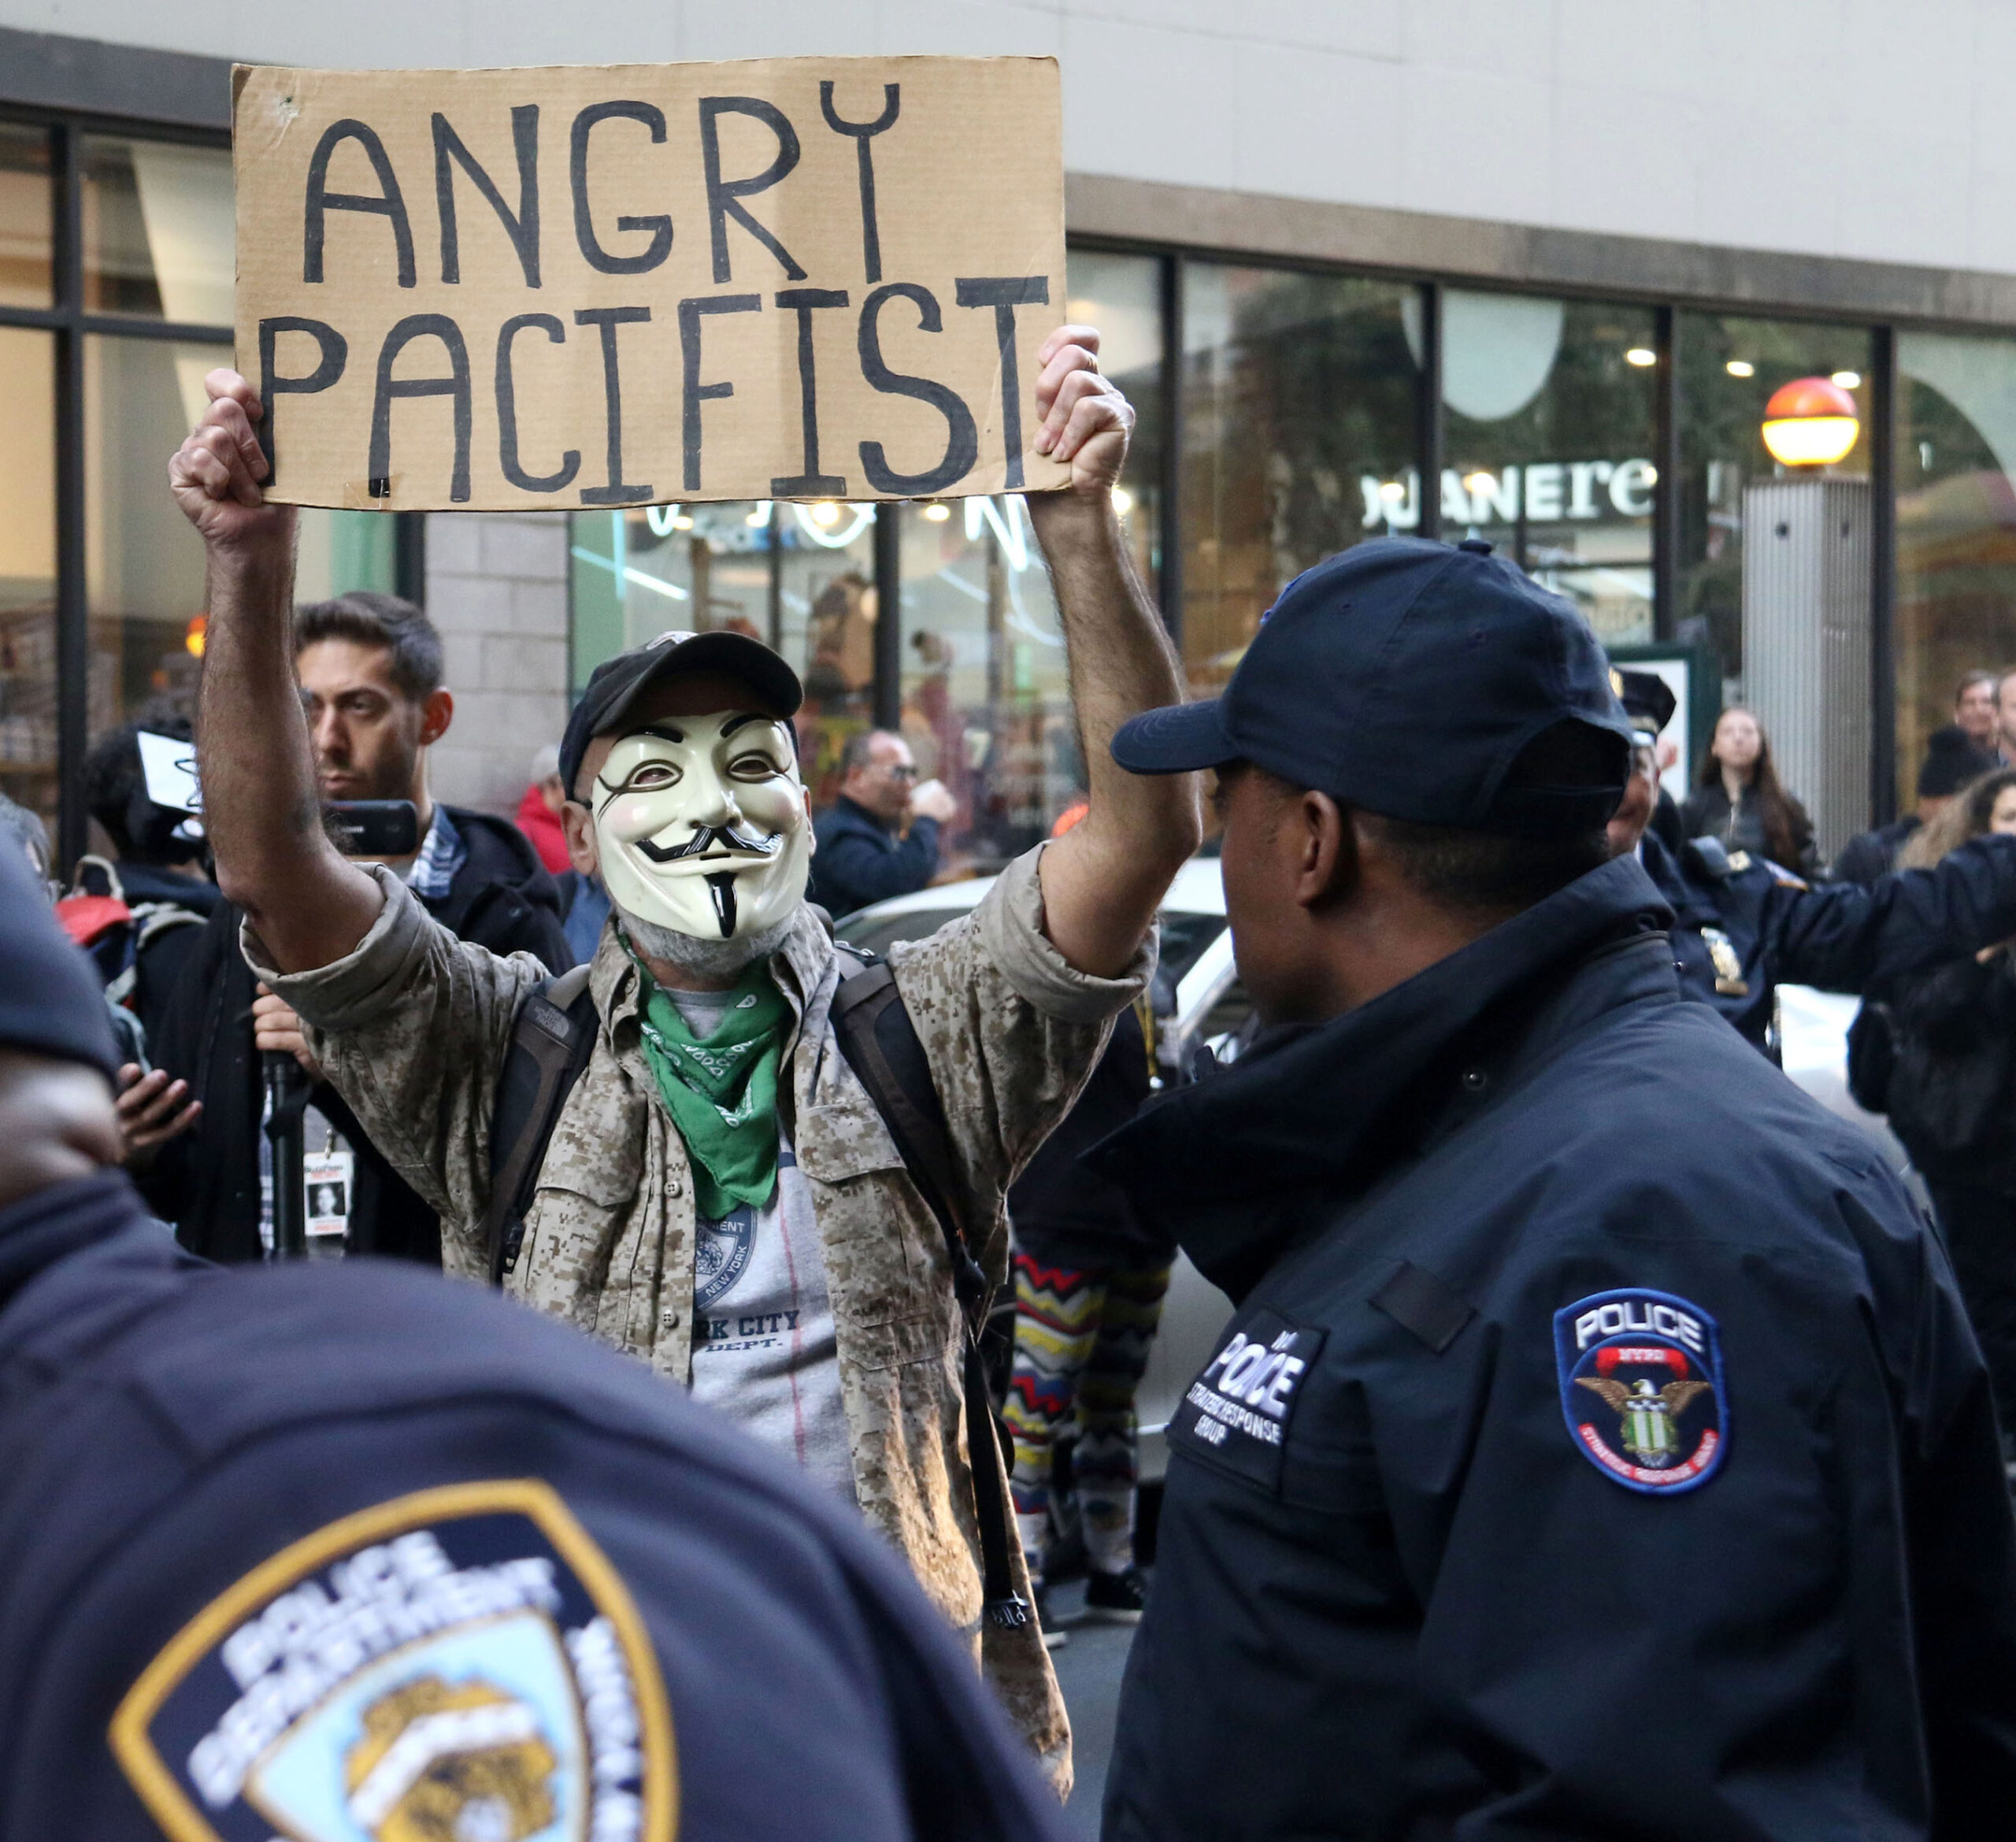 A protestor wearing a Guy Fawkes mask holds a cardboard sign that says, "Angry Pacifist." A police officer looks at him at the front.